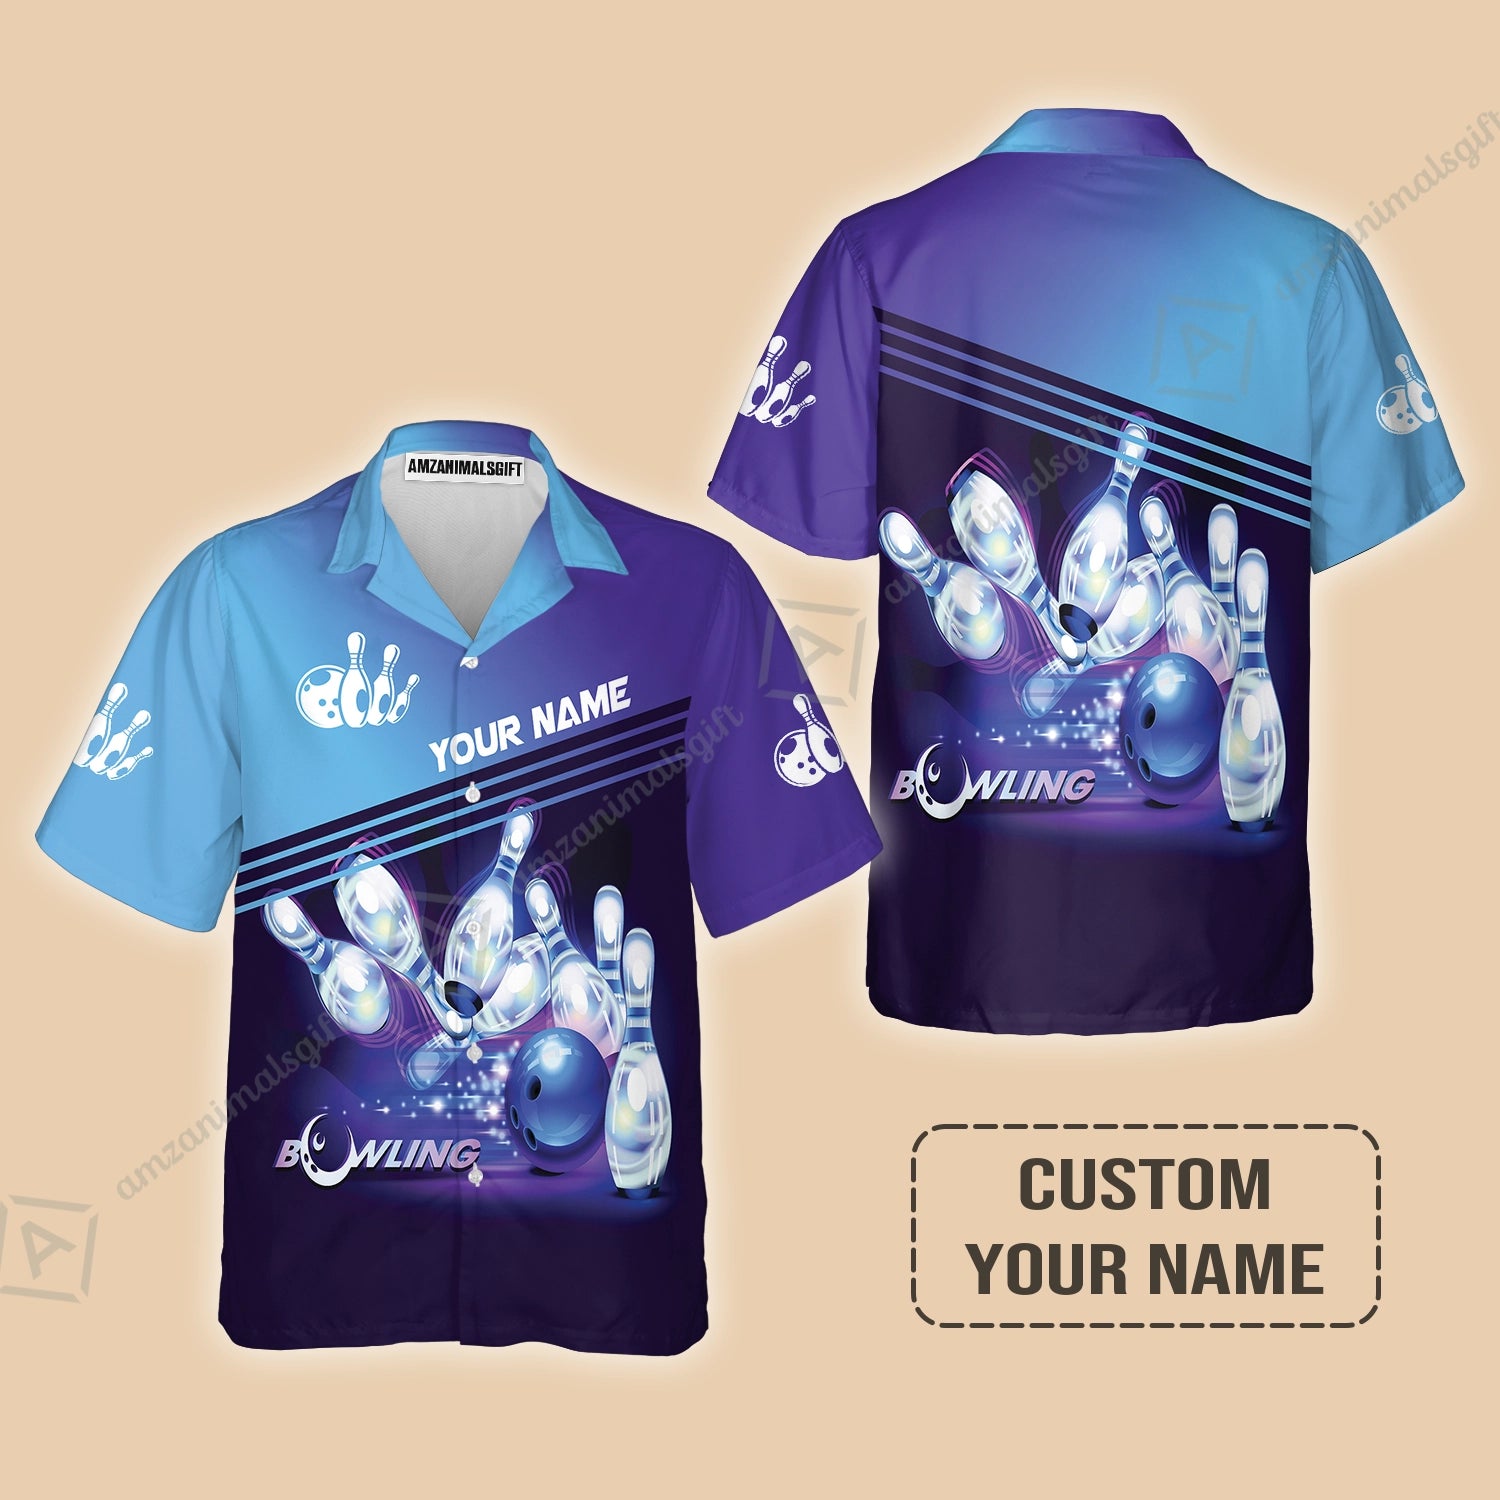 Bowling Hawaiian Shirt With Custom Name, Personalized Blue Bowling Shirt Uniform Players, Perfect Outfits For Bowling Lovers, Bowlers